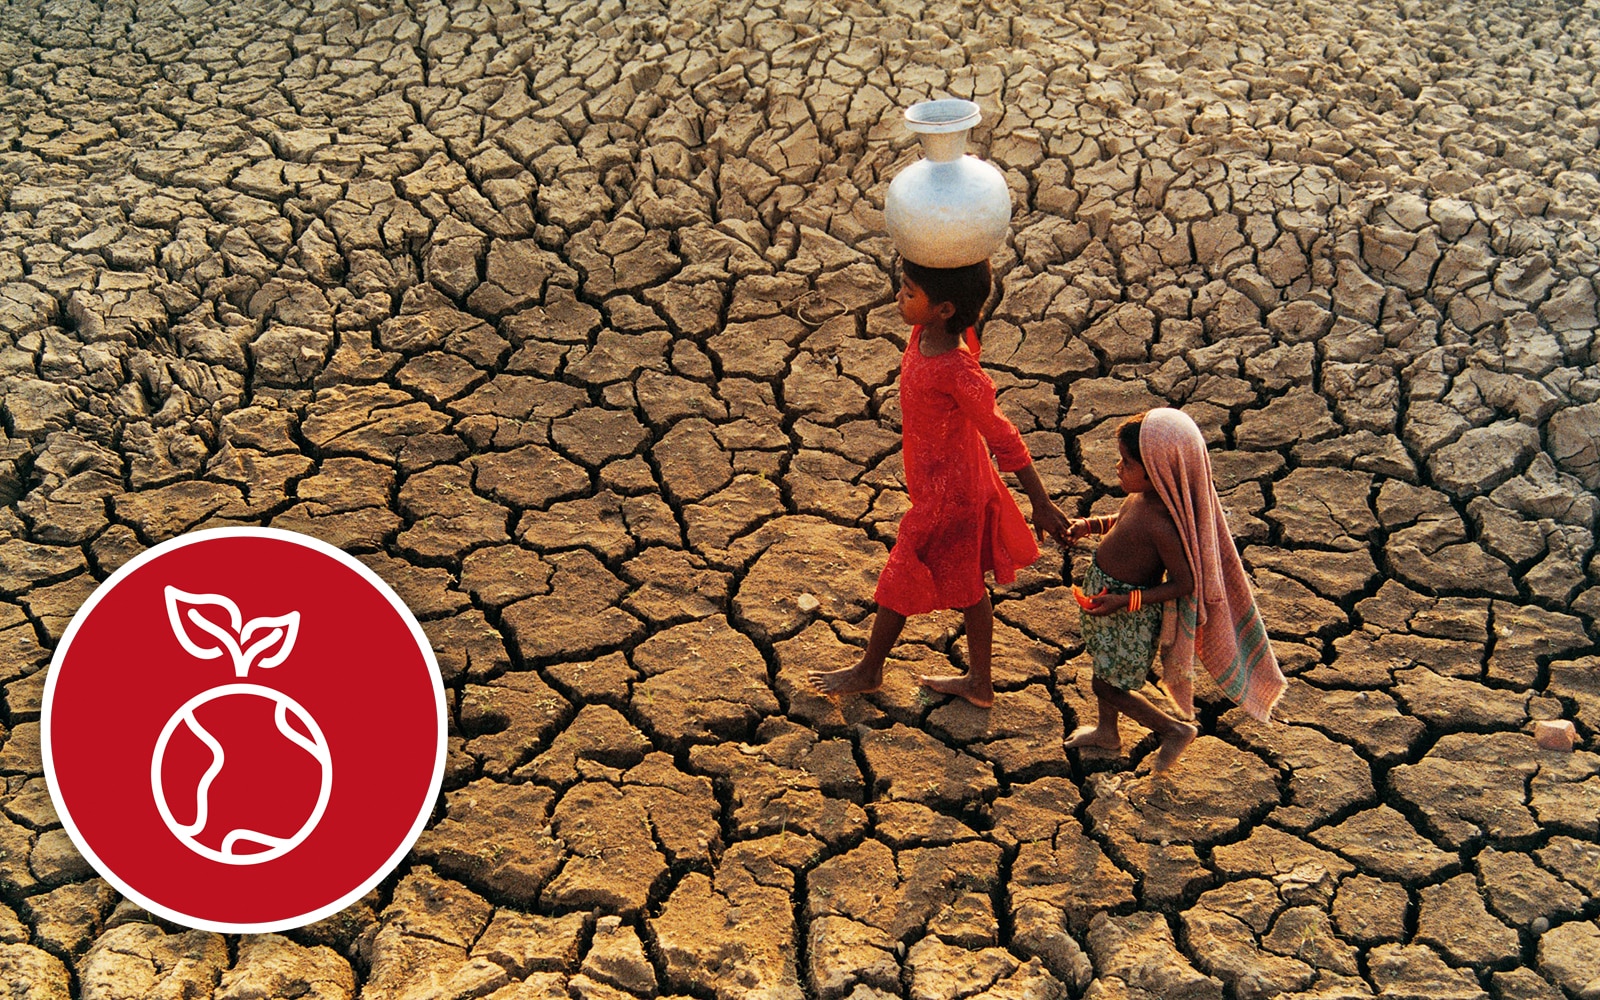  Two children walk across a dried-out river bed with a pitcher of water.